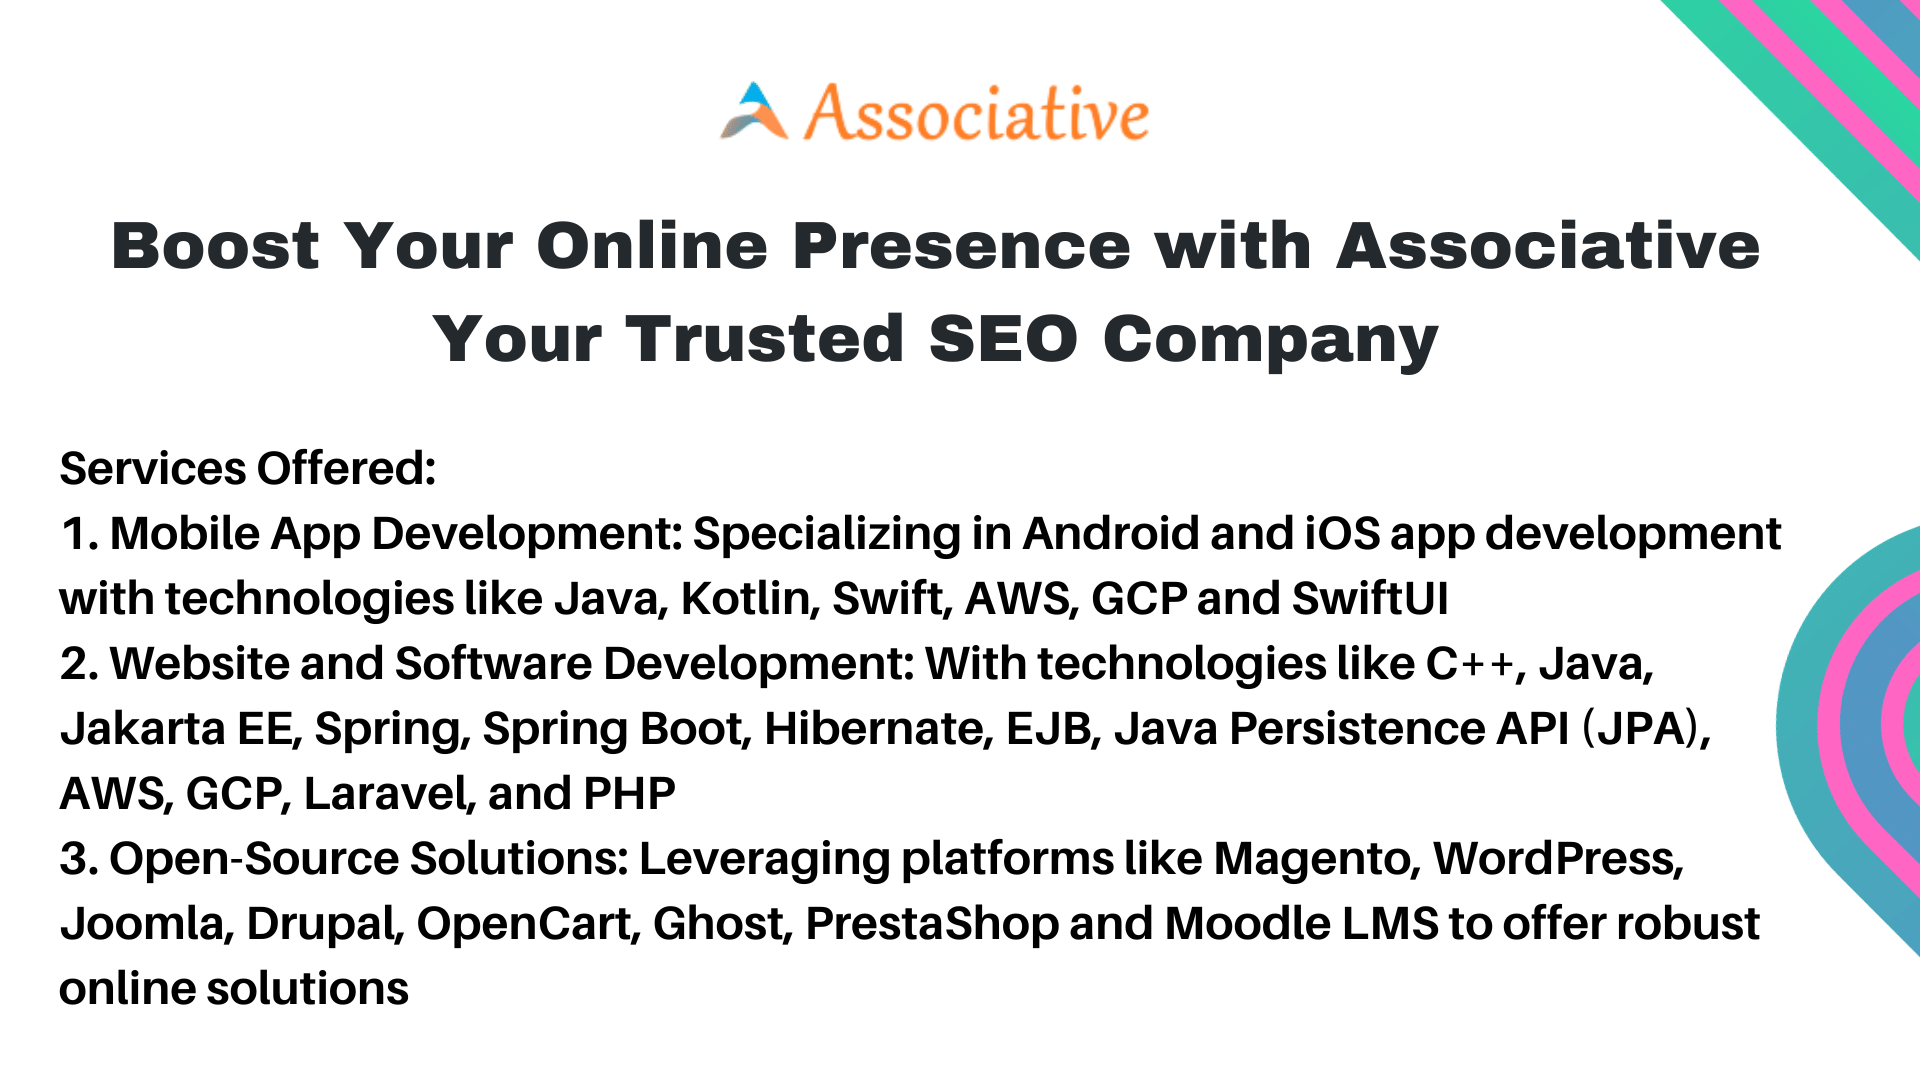 Boost Your Online Presence with Associative Your Trusted SEO Company